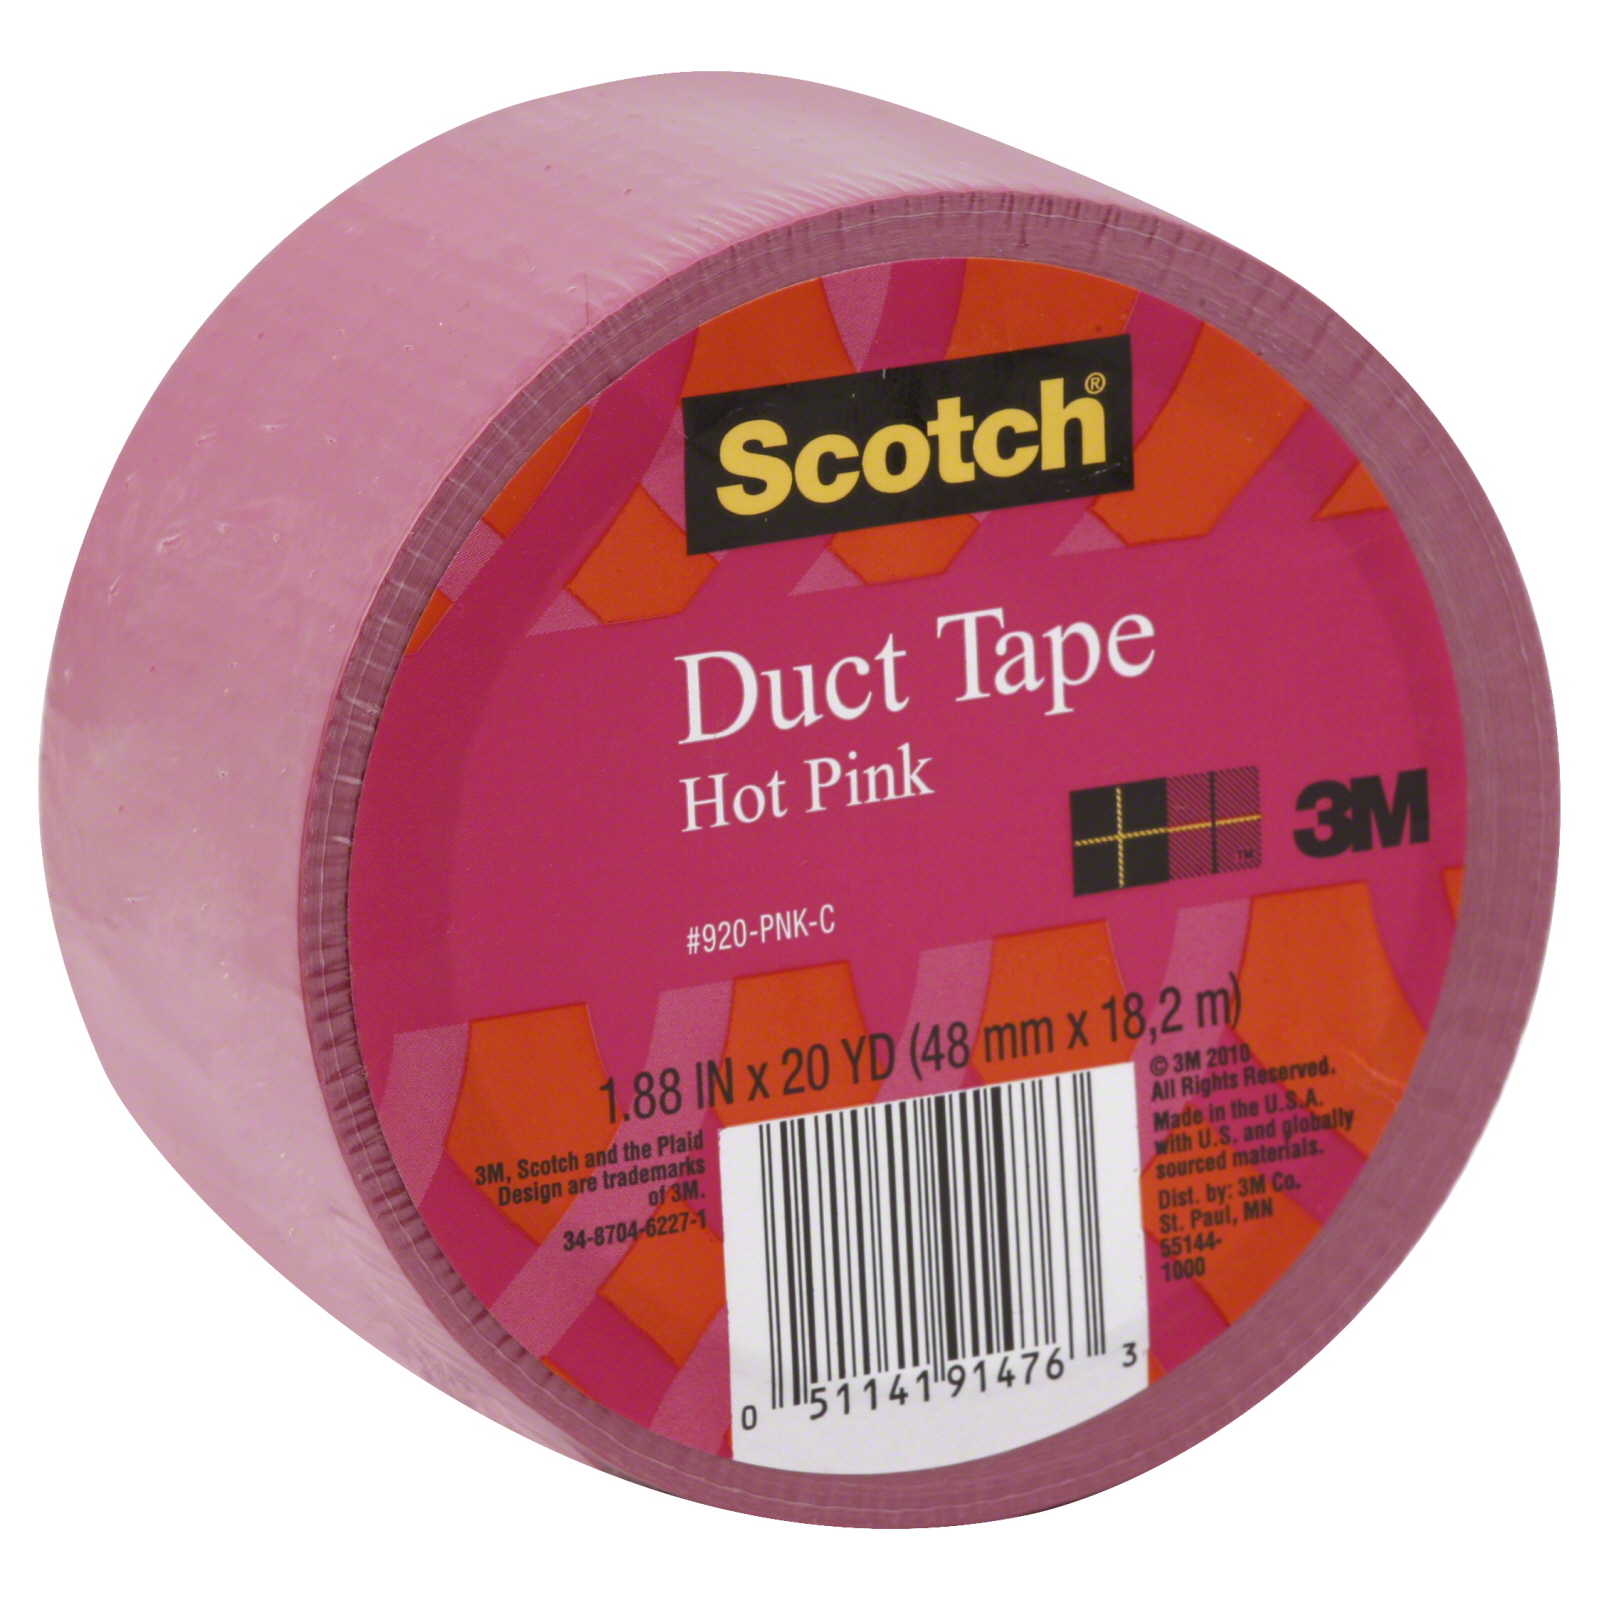 3M Hot Pink Duct Tape 1.88" x 20 Yards